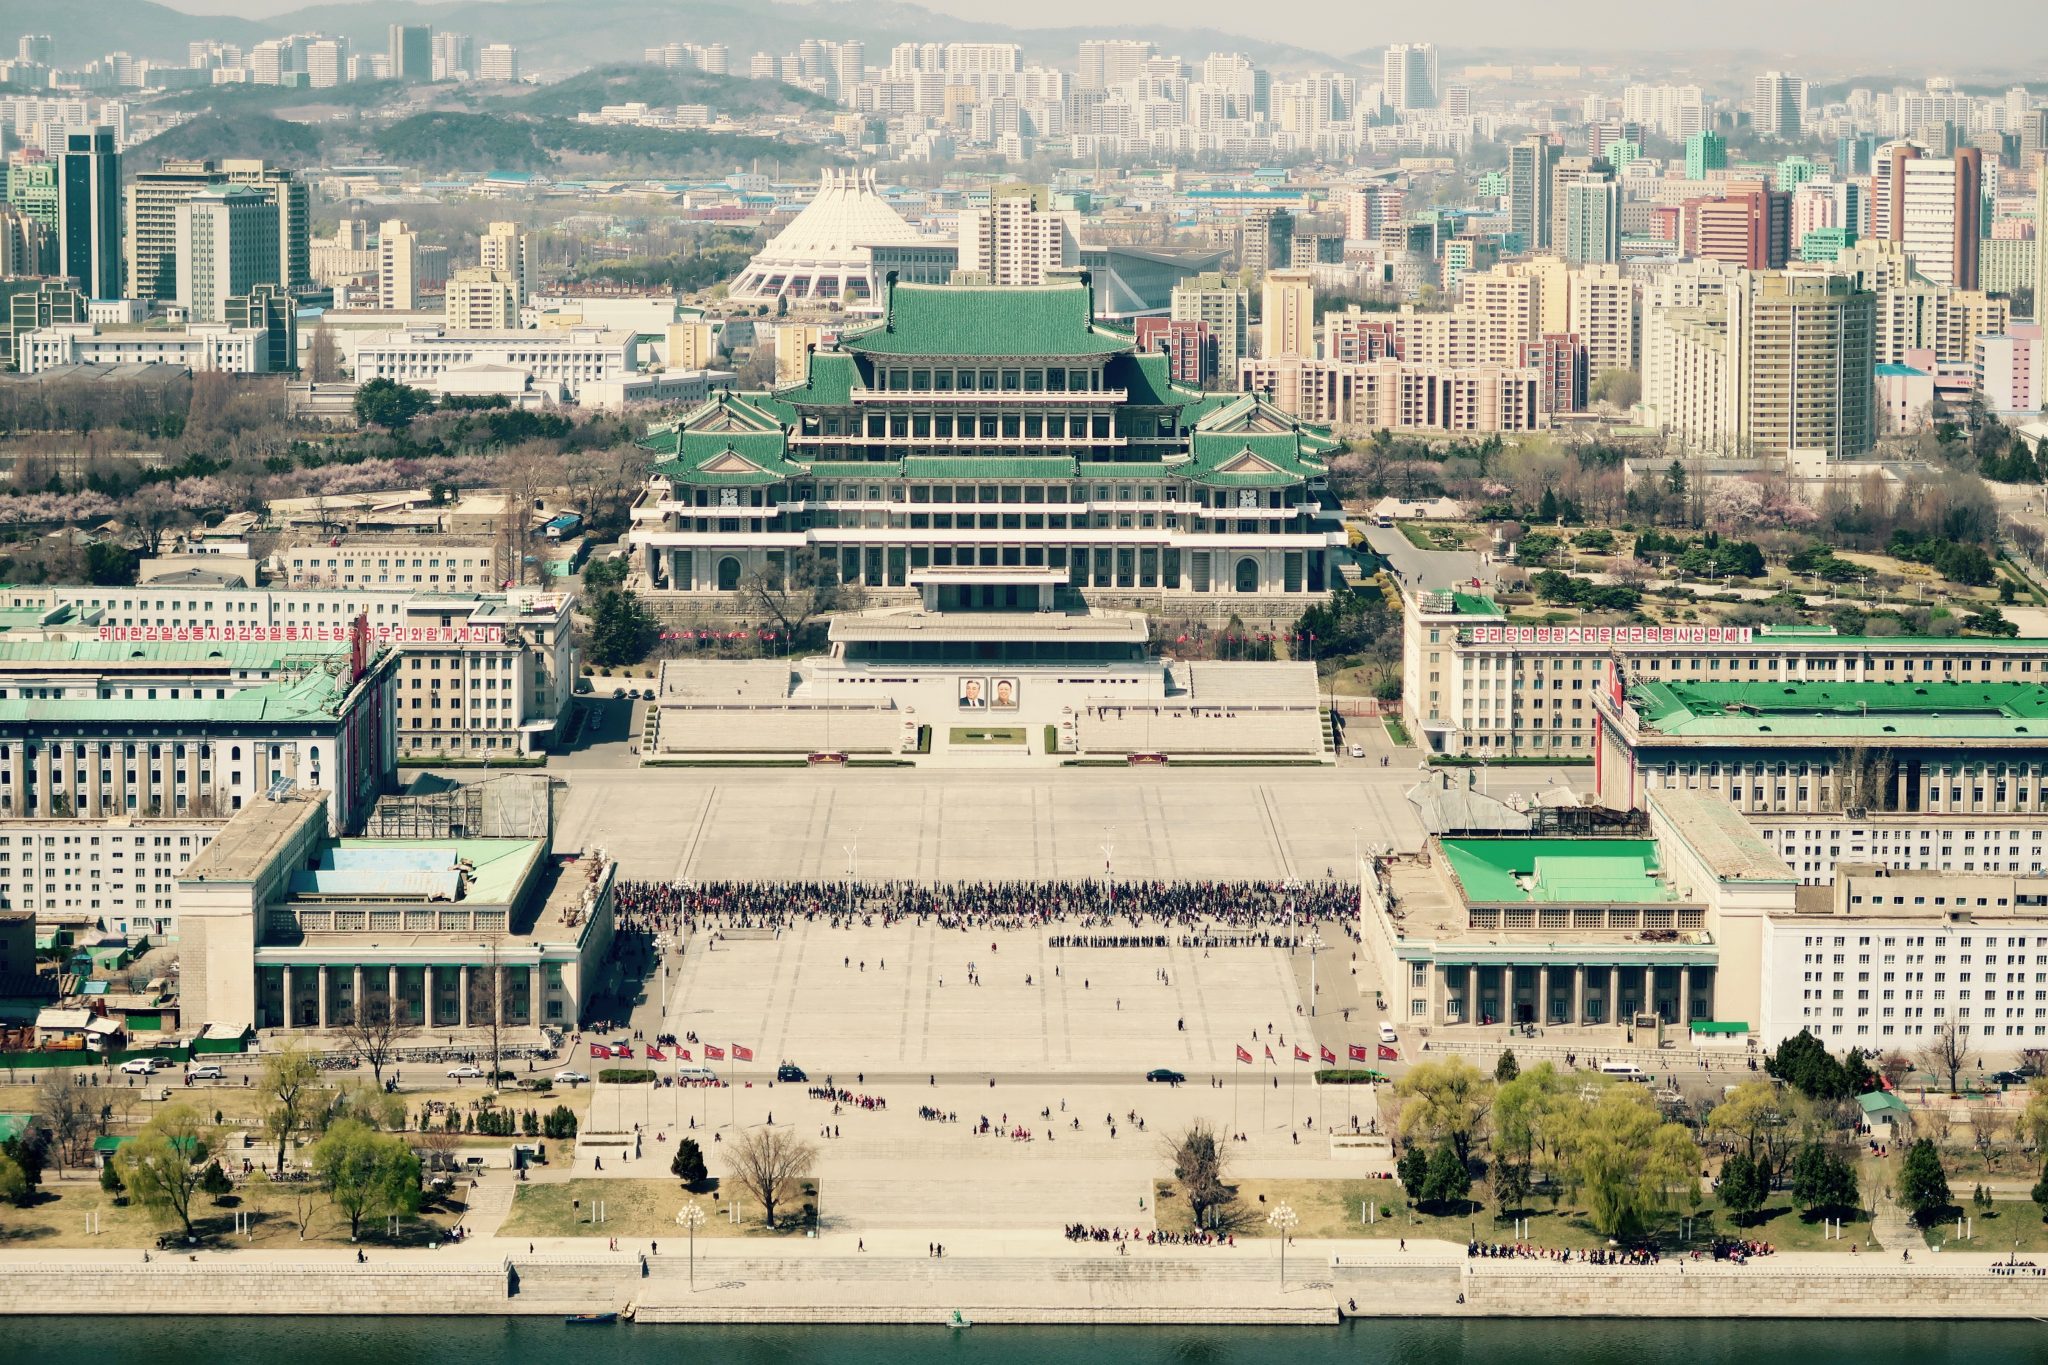 A quick guide to North Korean cities — Young Pioneer Tours